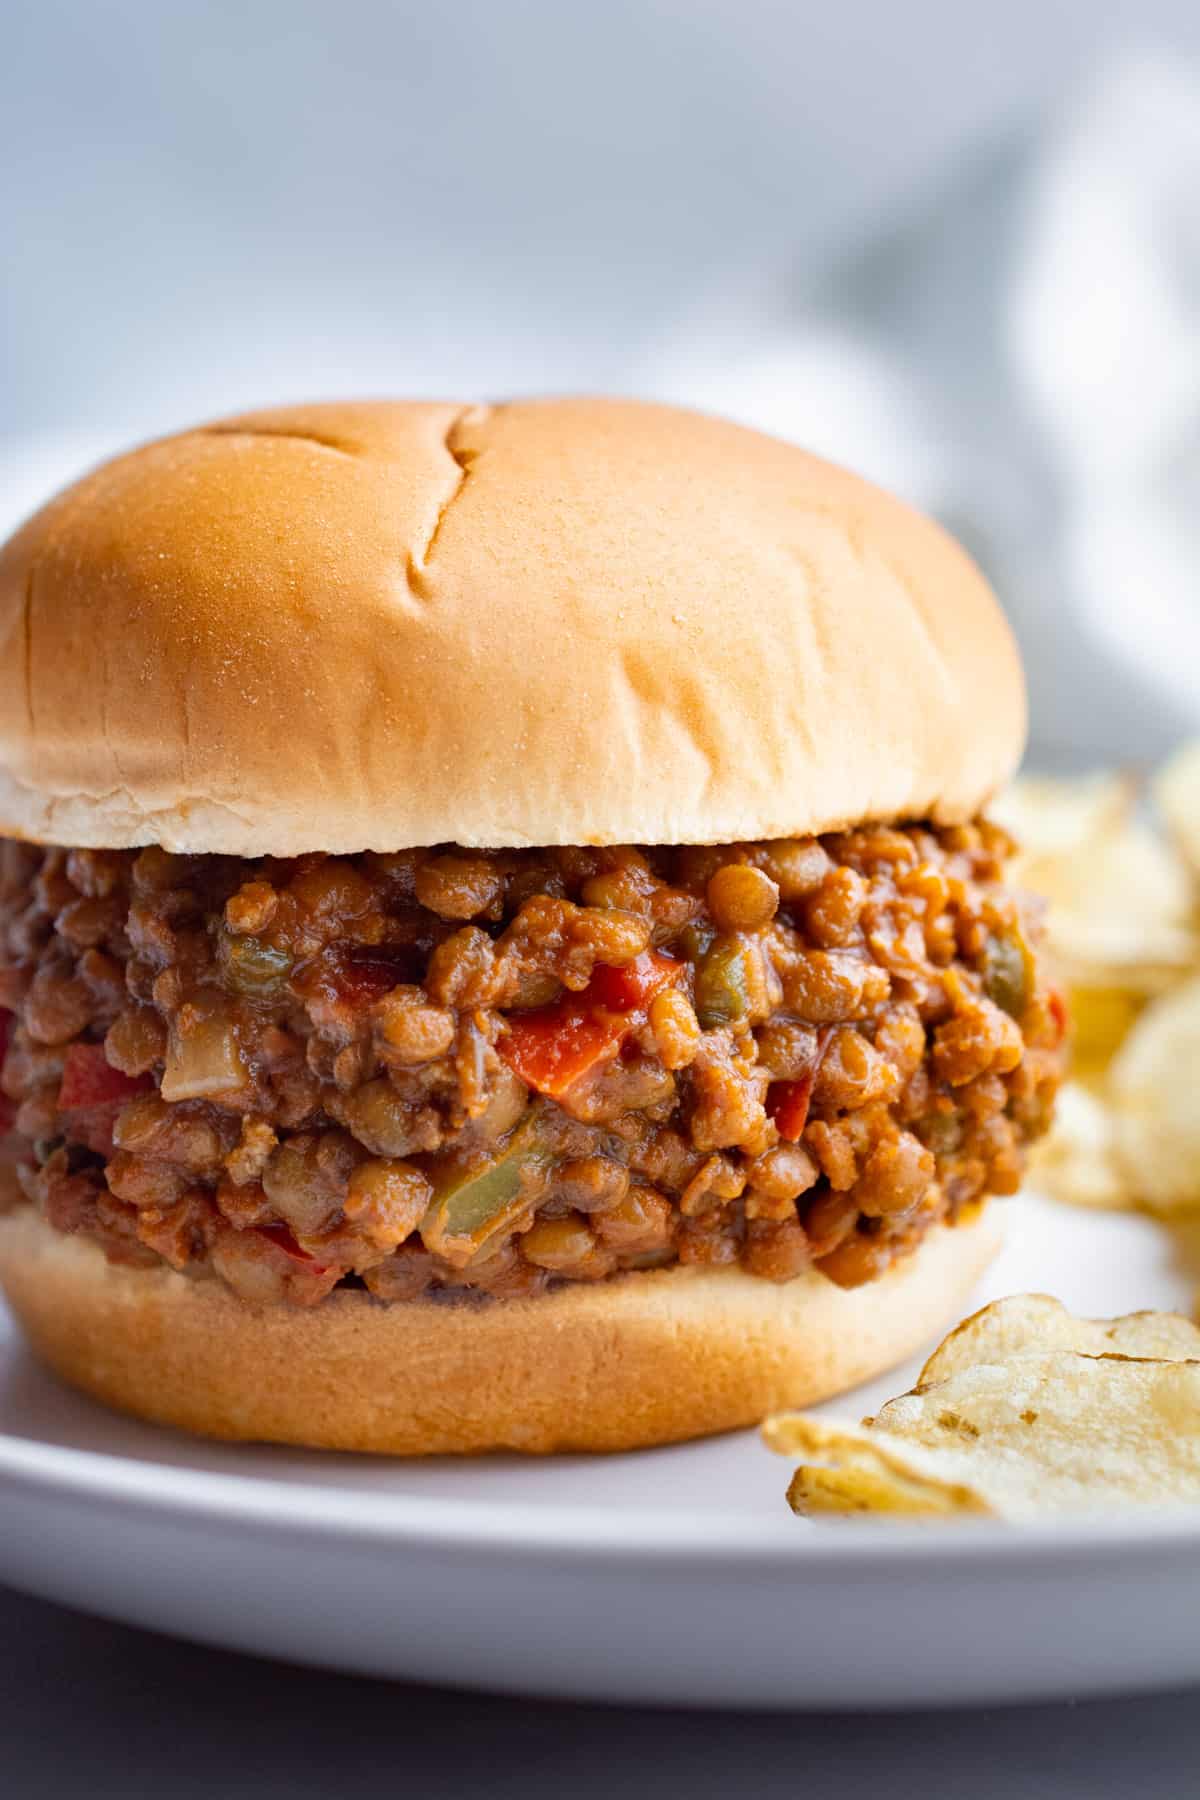 vegan lentil and tofu sloppy joes on a white bun with a side of potato chips.